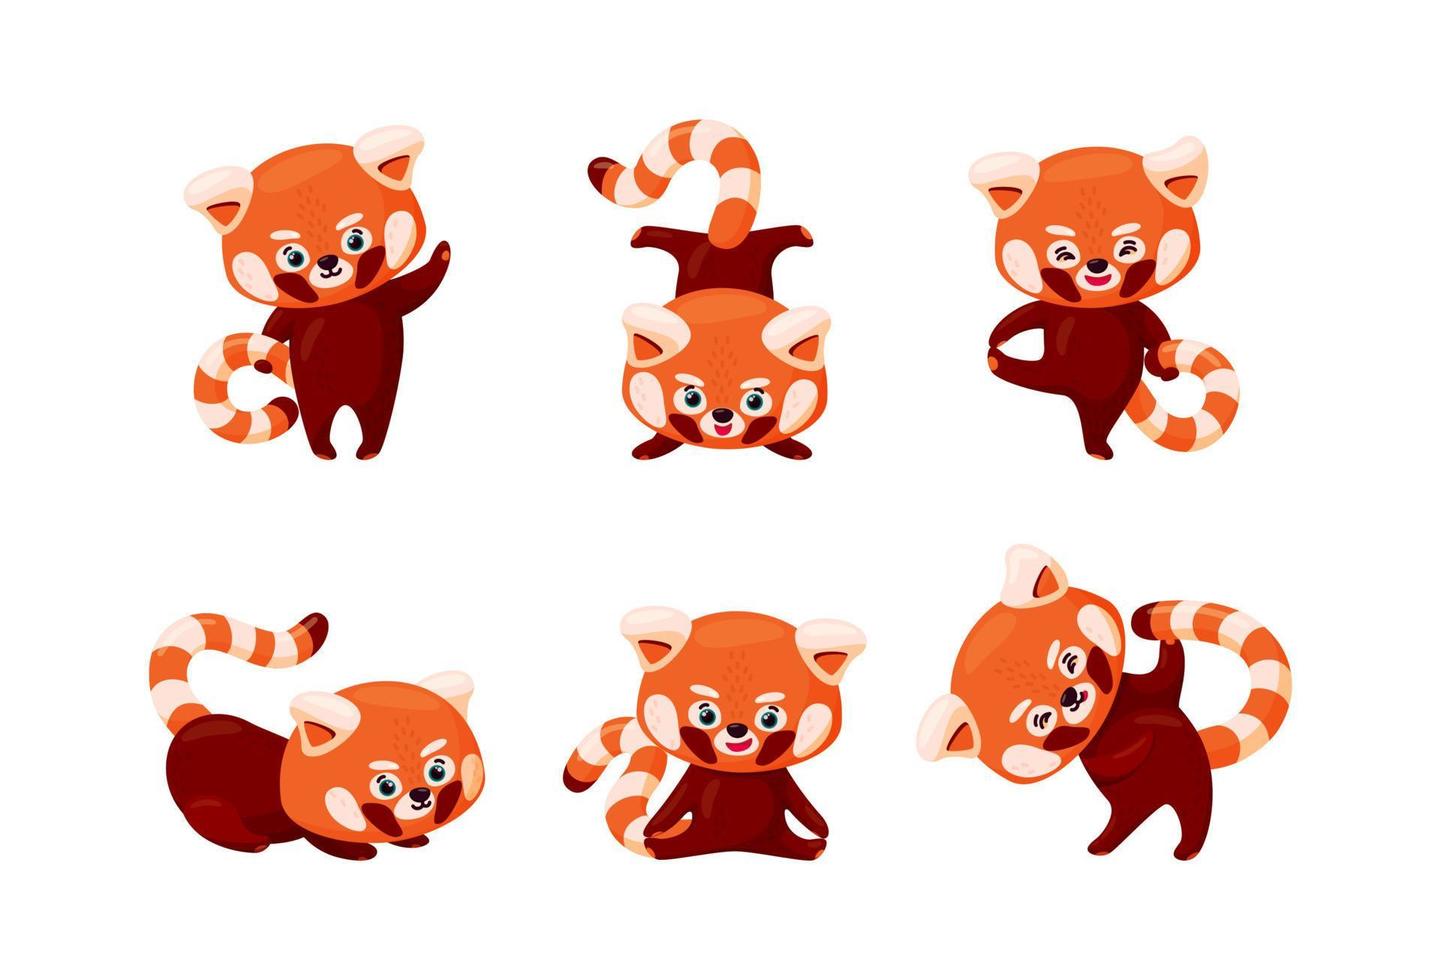 Red panda set. Cute baby red pandas stretching and practicing yoga. Baby animals doing stratching exercises isolated in white background. Vector illustration